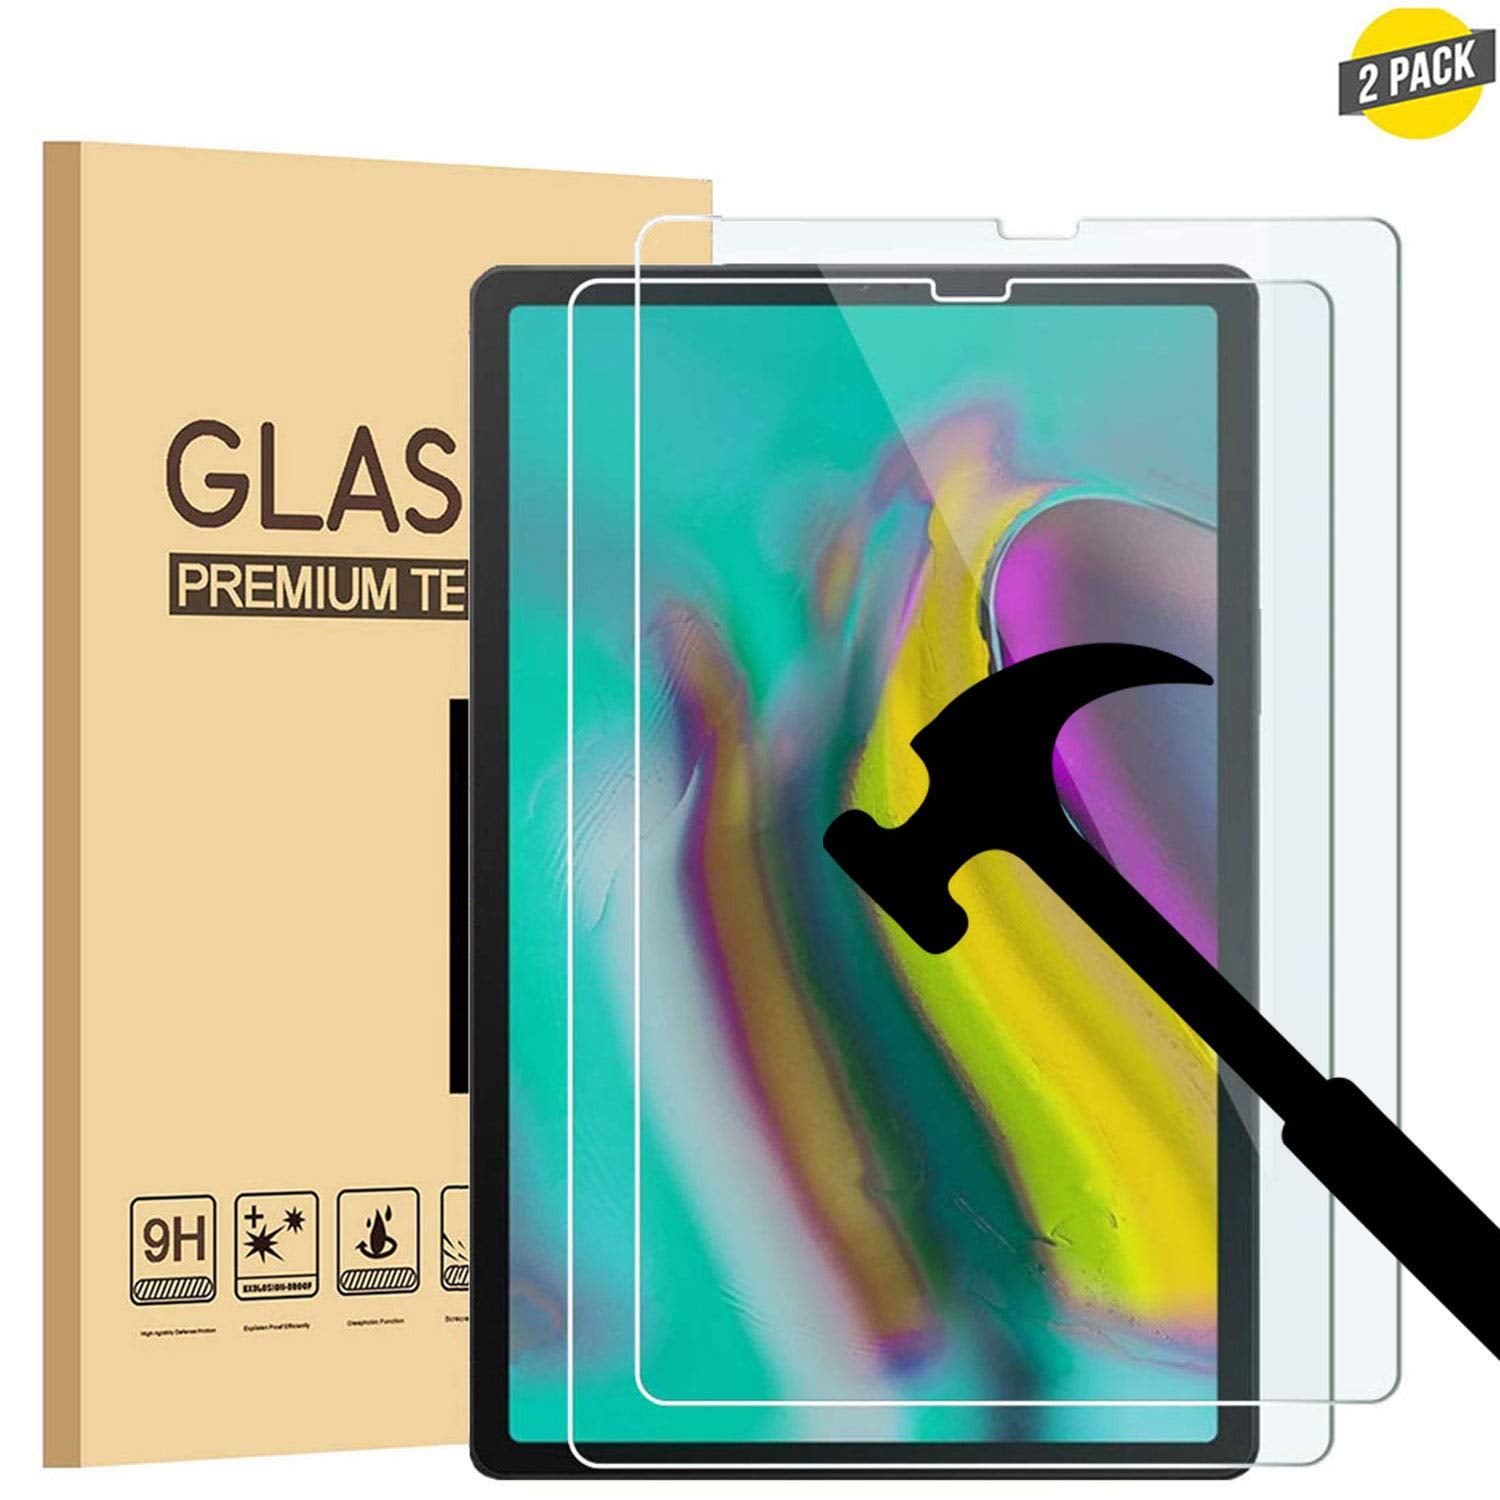 2 EpicGadget Screen Protector for Galaxy Tab A 10.1 2019 SM-T510/SM-T515 Scratch Resistant Bubble Free Tempered Glass Screen Protector for Samsung Galaxy Tab A 10.1 Released in 2019 - Walmart.com